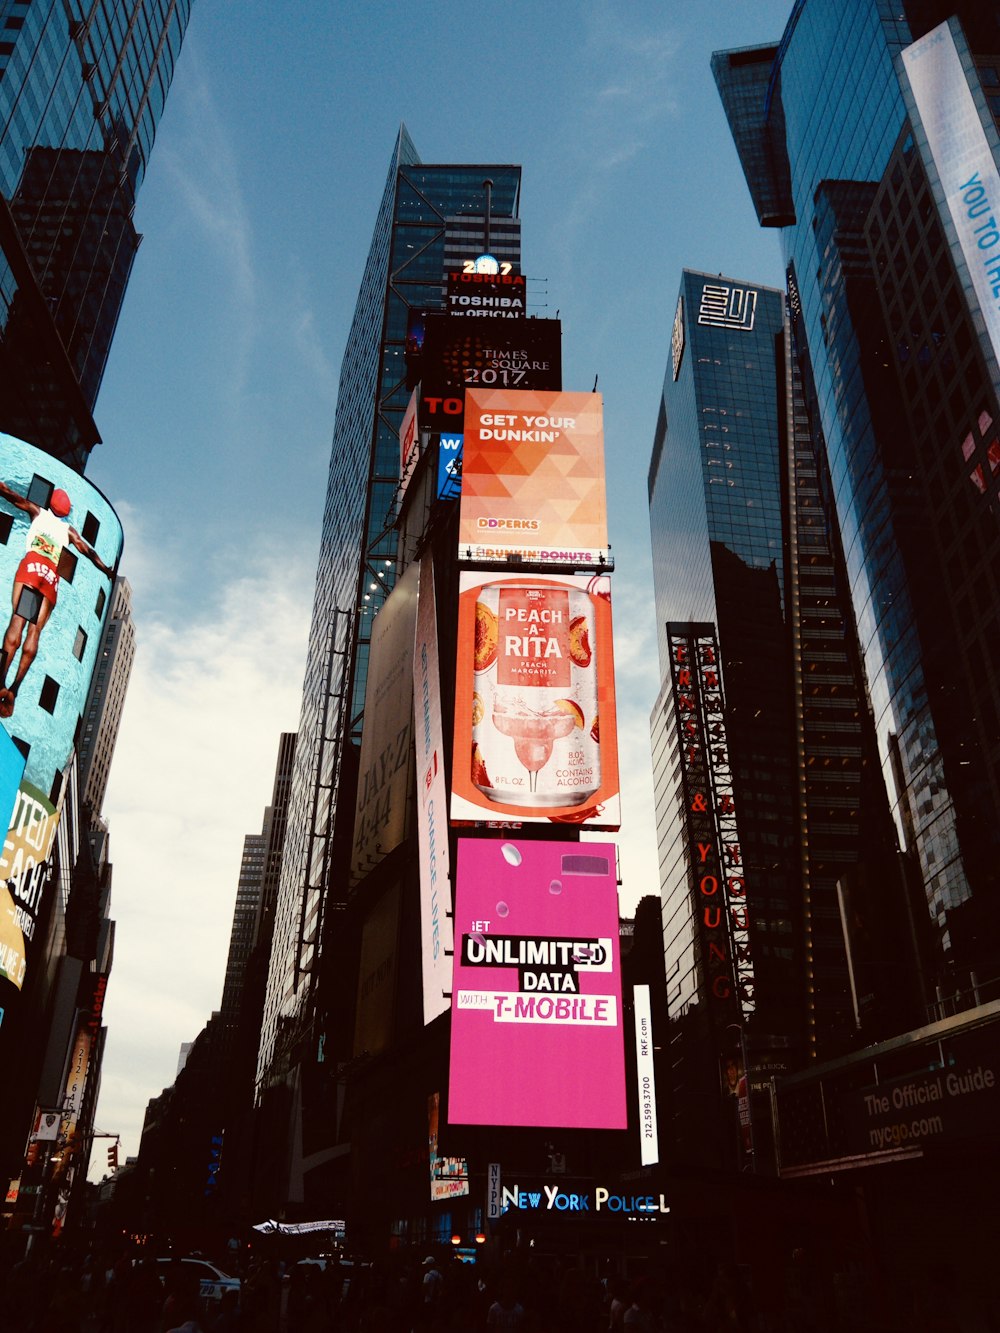 Download New York Times Square New York Photo Free Building Image On Unsplash